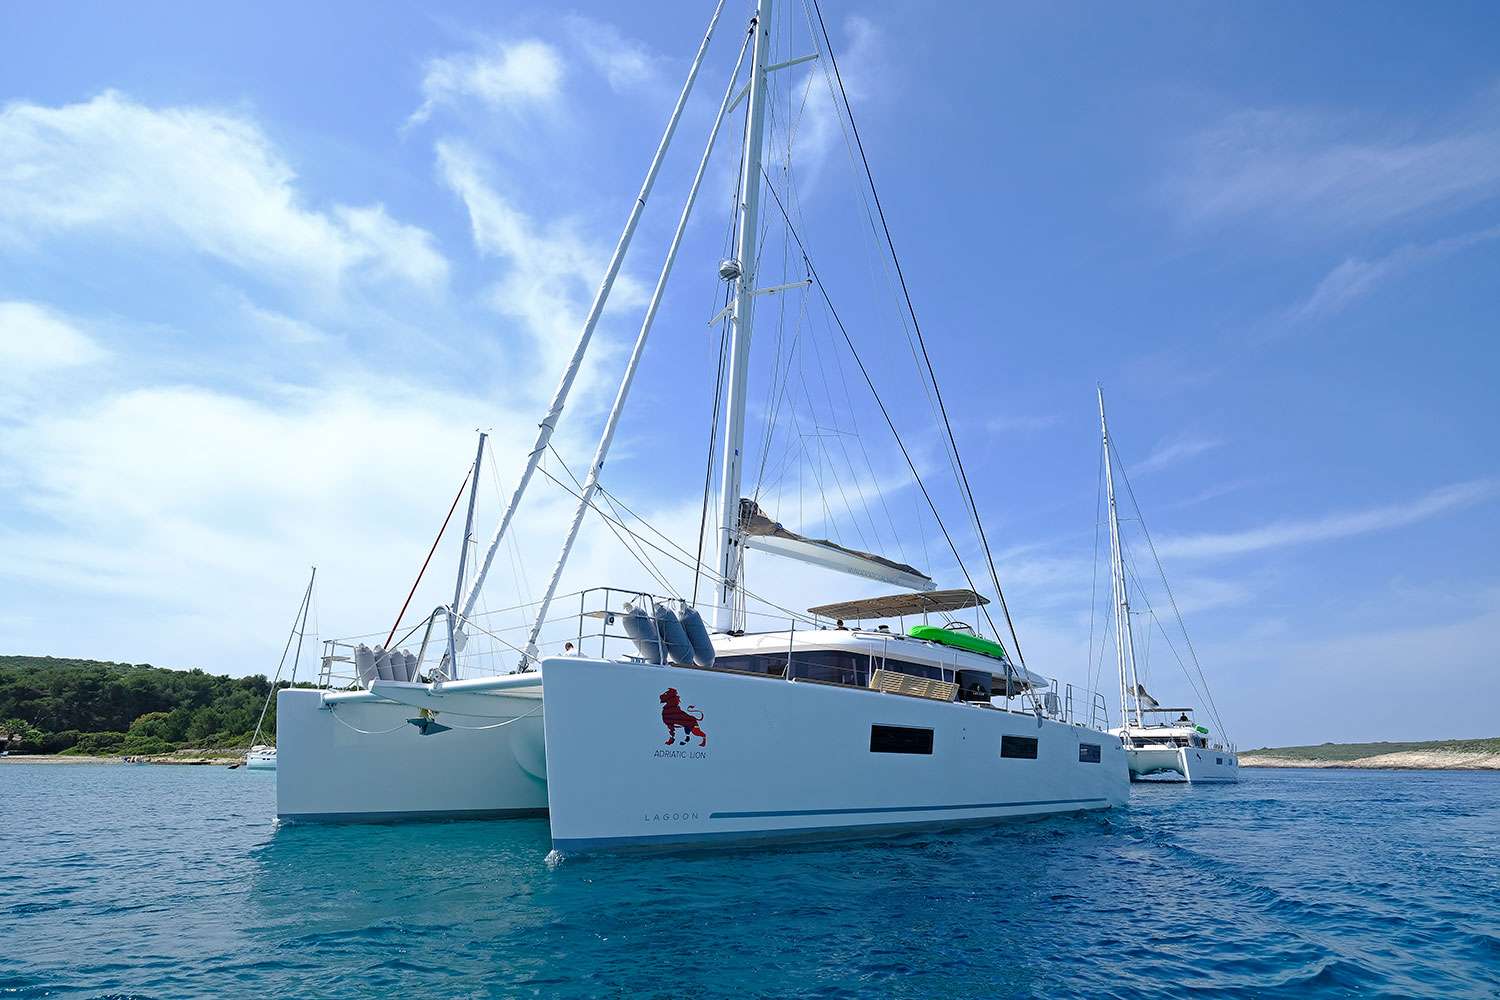 ADRIATIC LION (Lagoon 620) Yacht Charter - Ritzy Charters